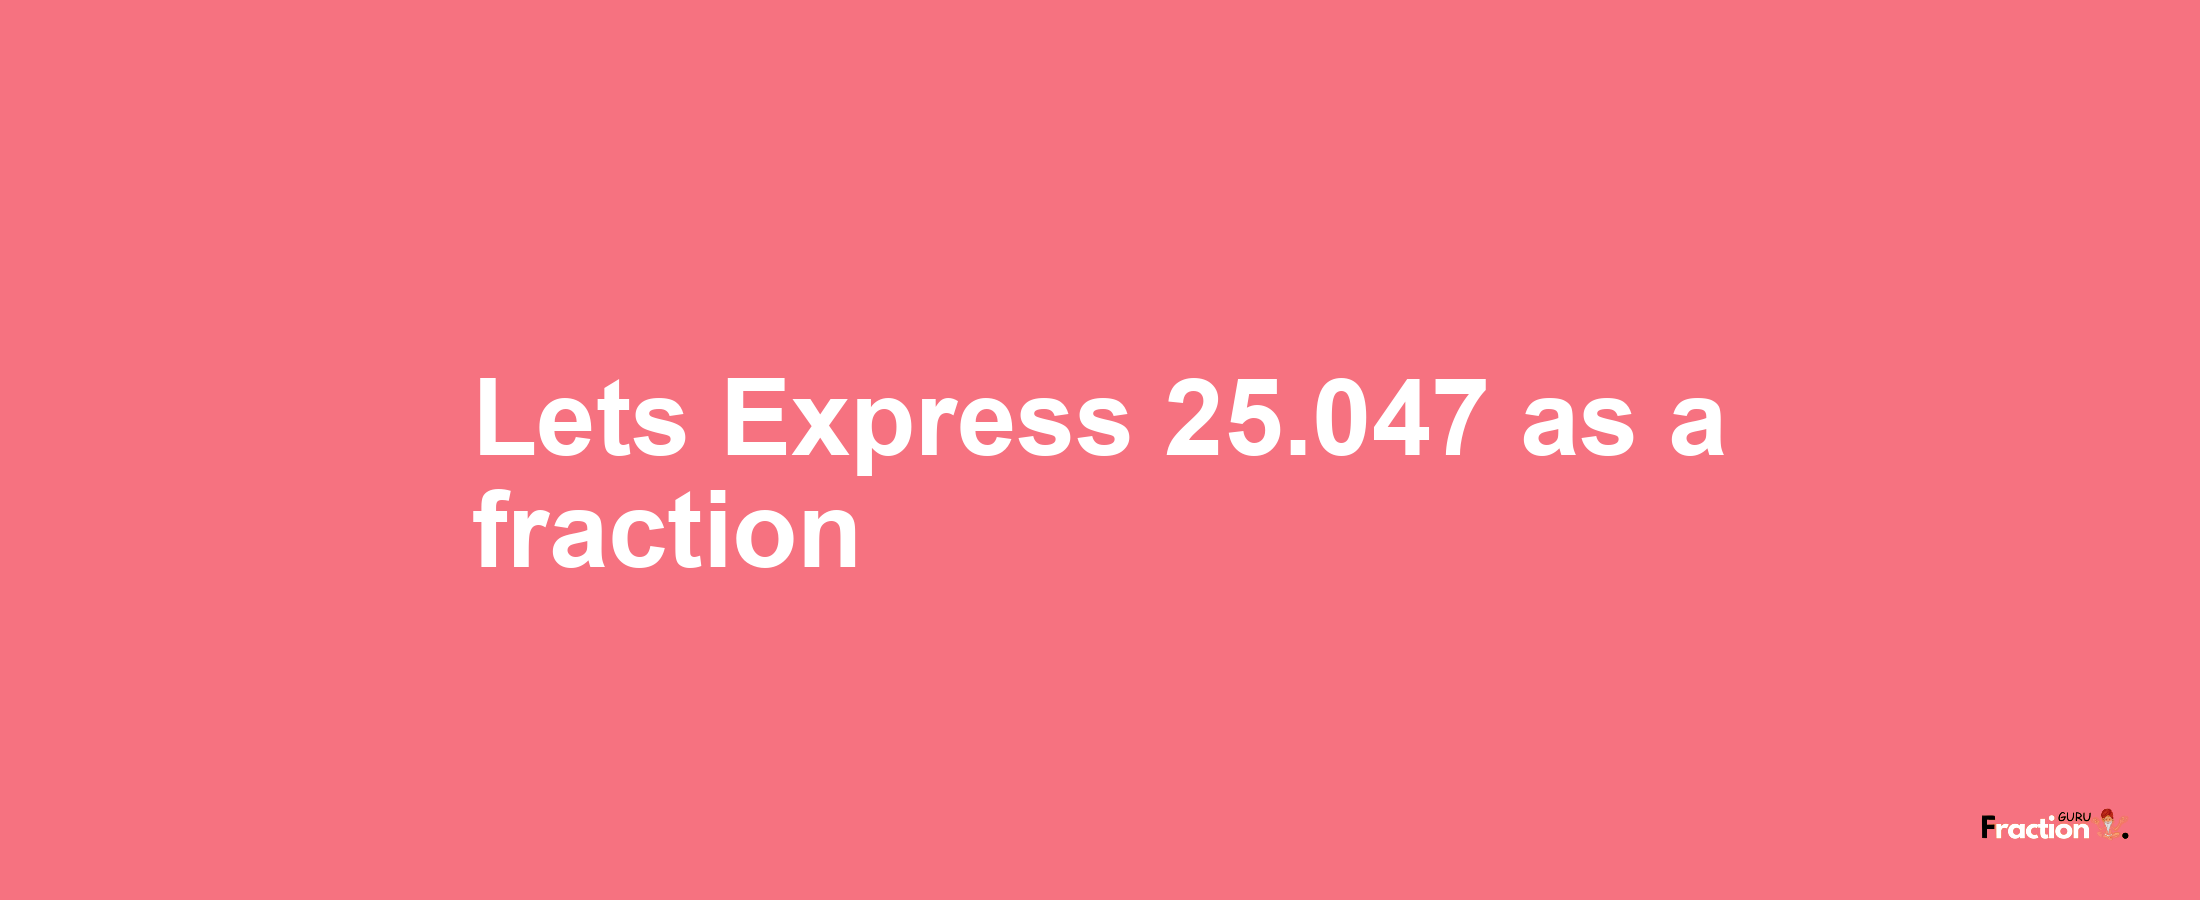 Lets Express 25.047 as afraction